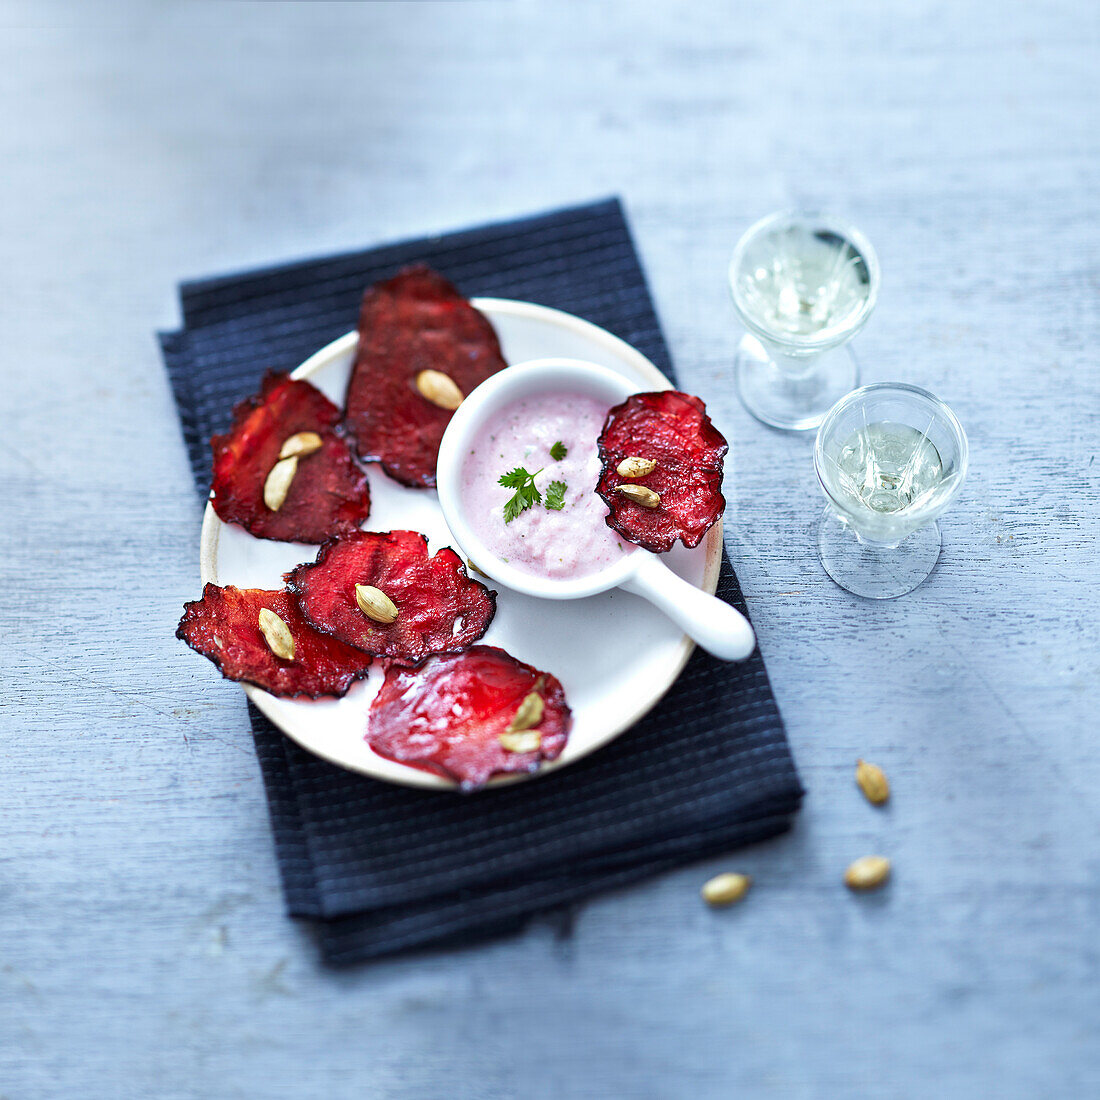 Beetroot crisps with radish and chervil creamy dip